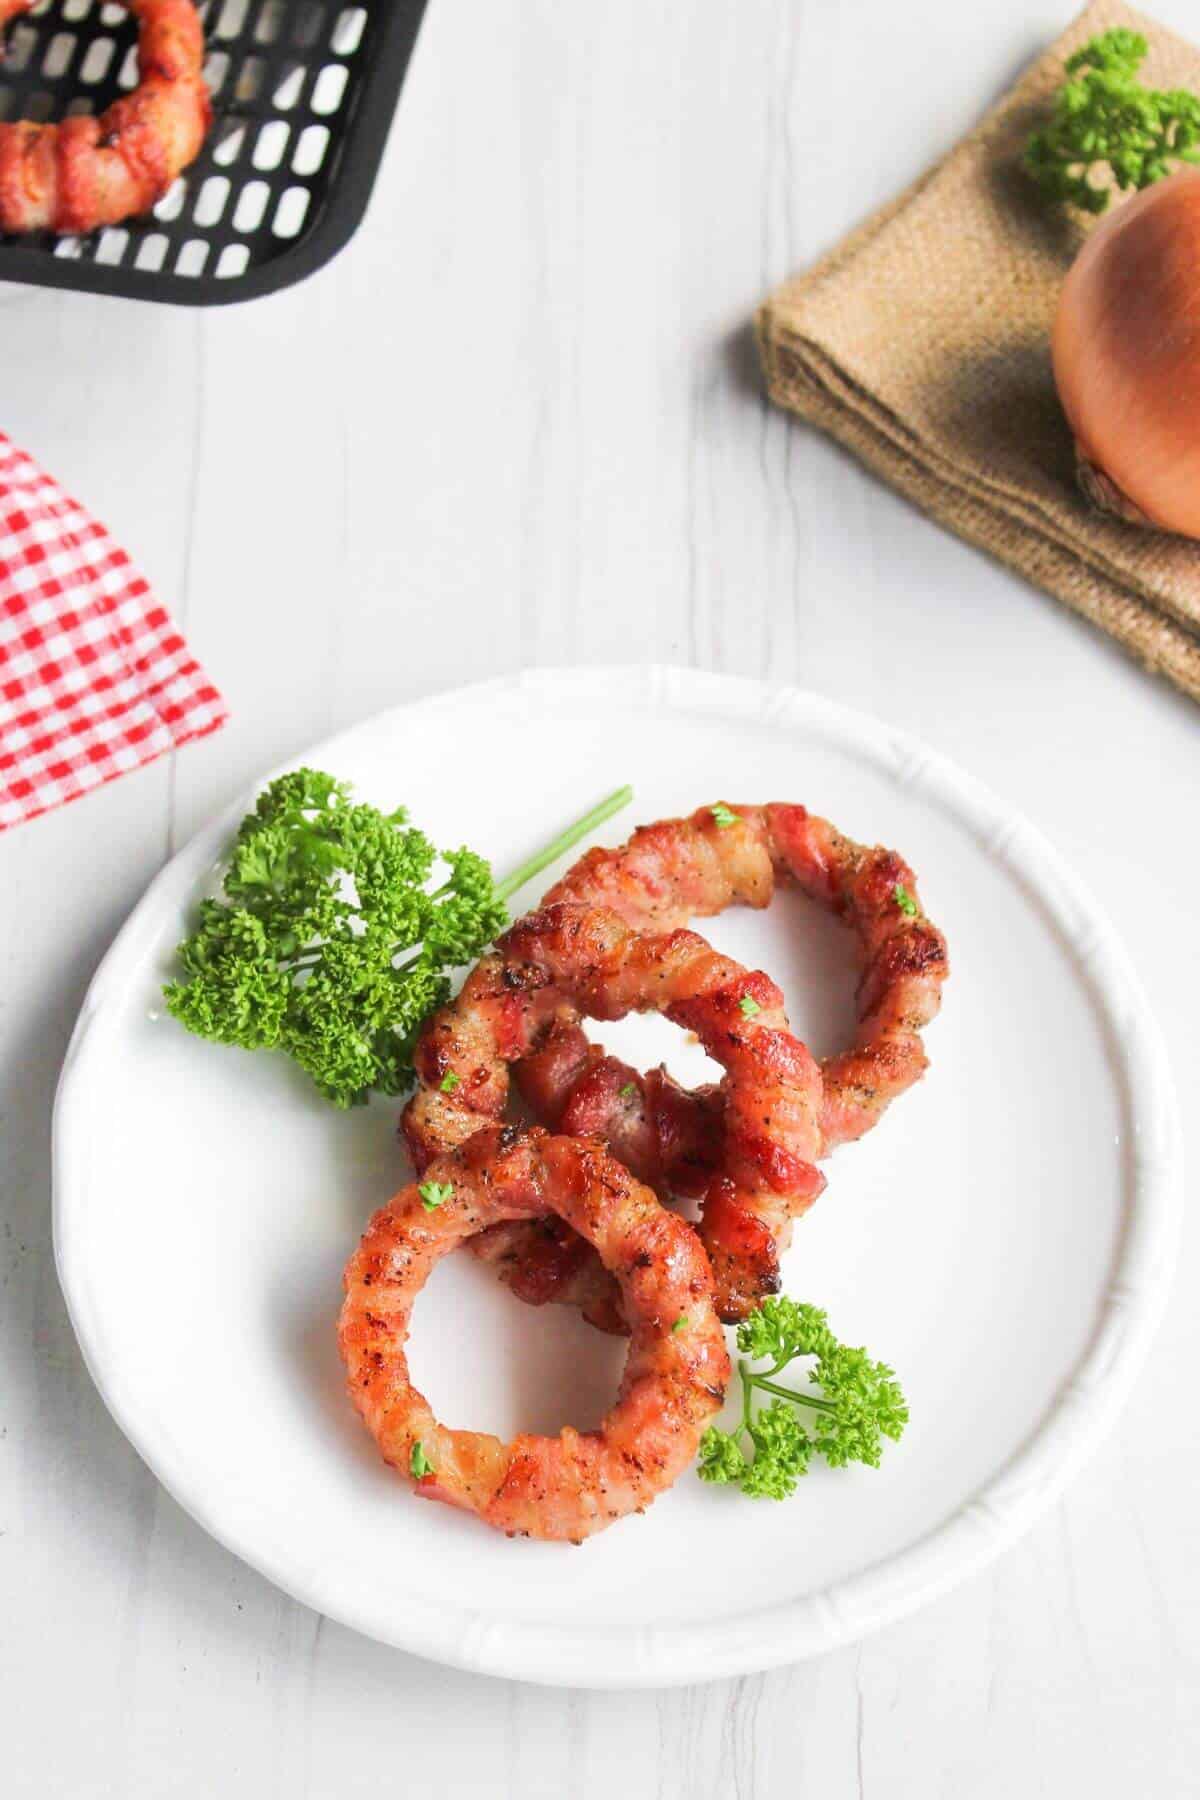 Bacon wrapped onion rings on white plate.